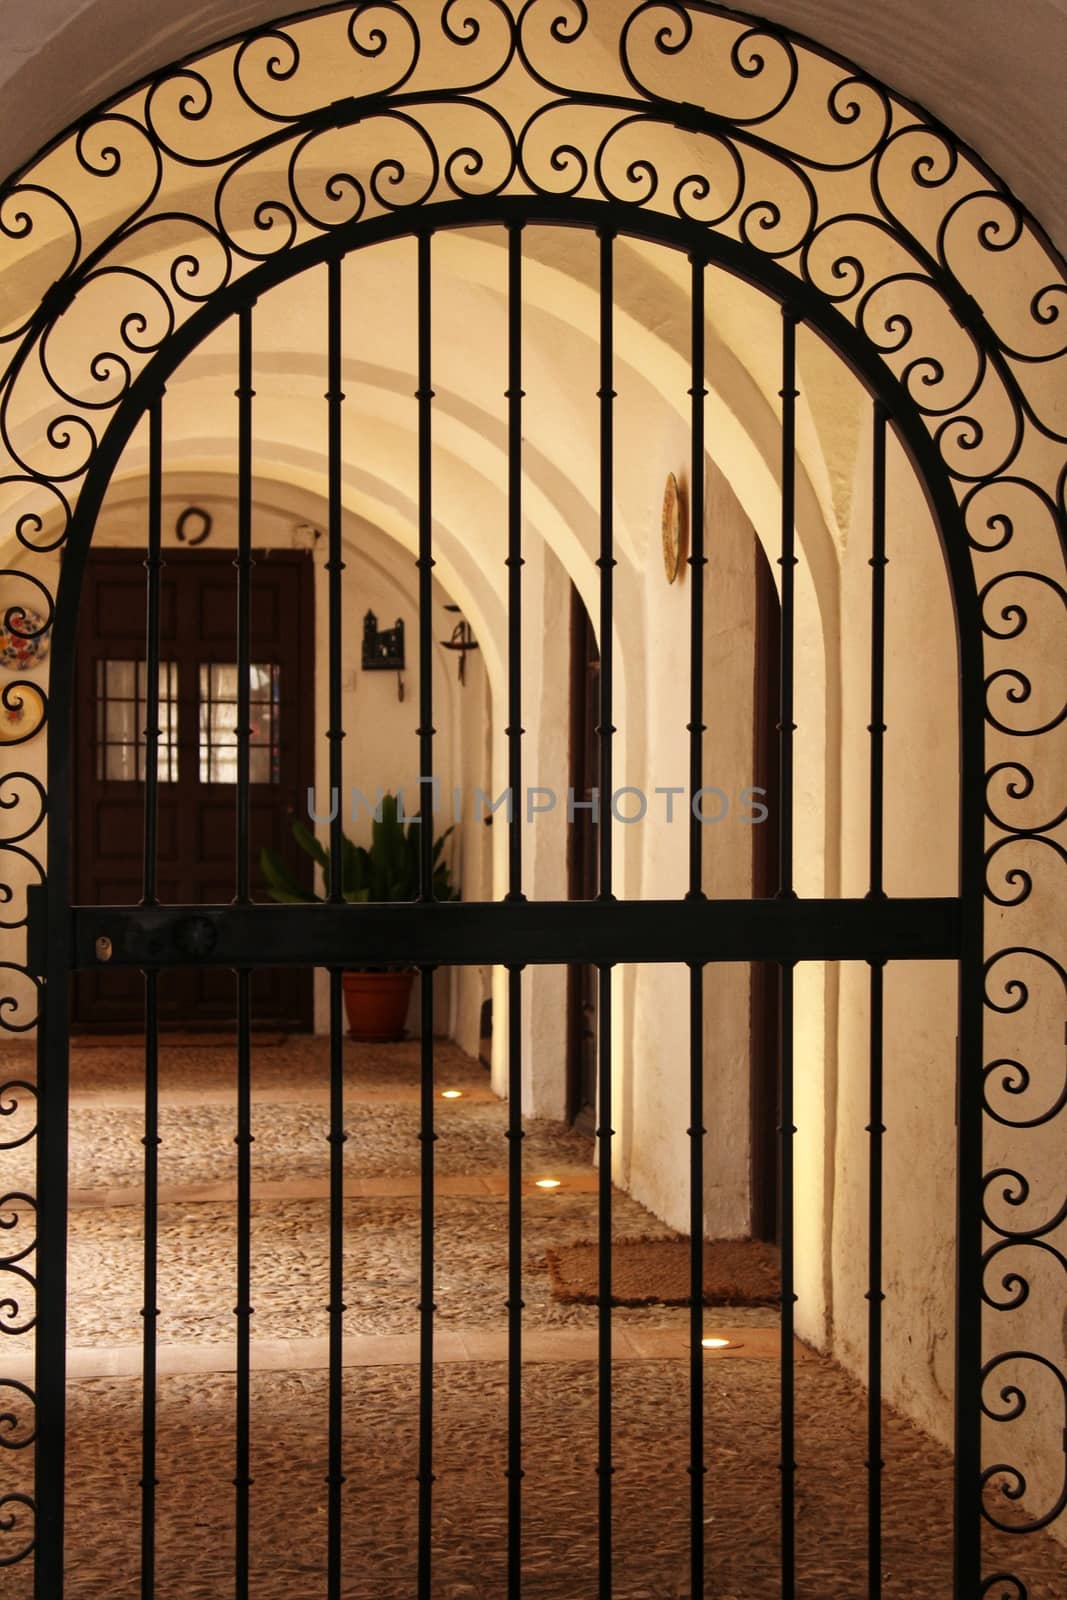 Lattice of entrance to patio of typical house of Castile-la Mancha community in Spain